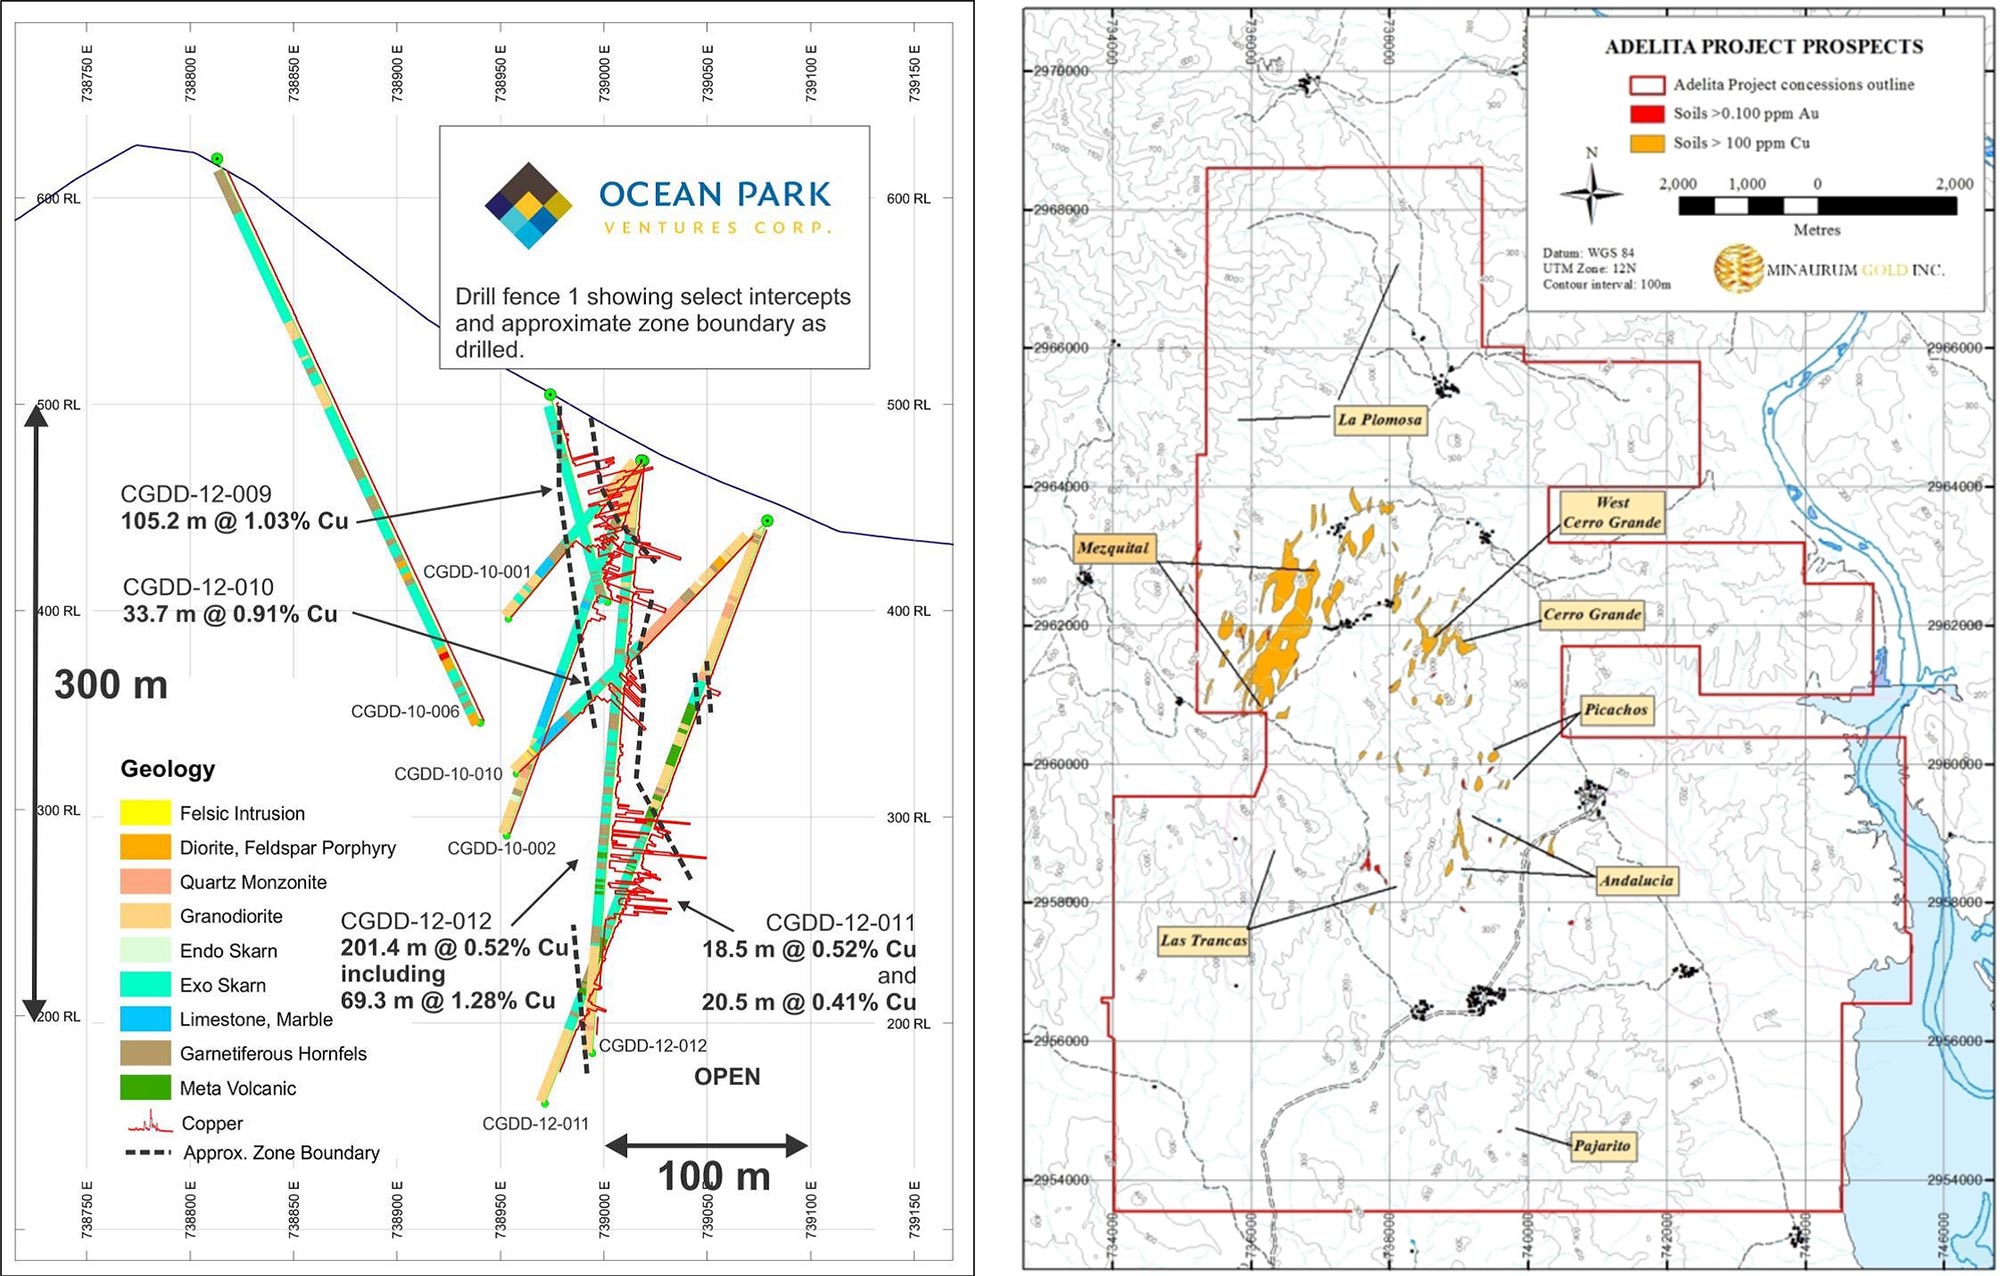 Map of Cerro Grande Minerlaized Skarn Trend (left) Map of Adelita project showing outline of concessions and locations of prospect areas described in this report (right)